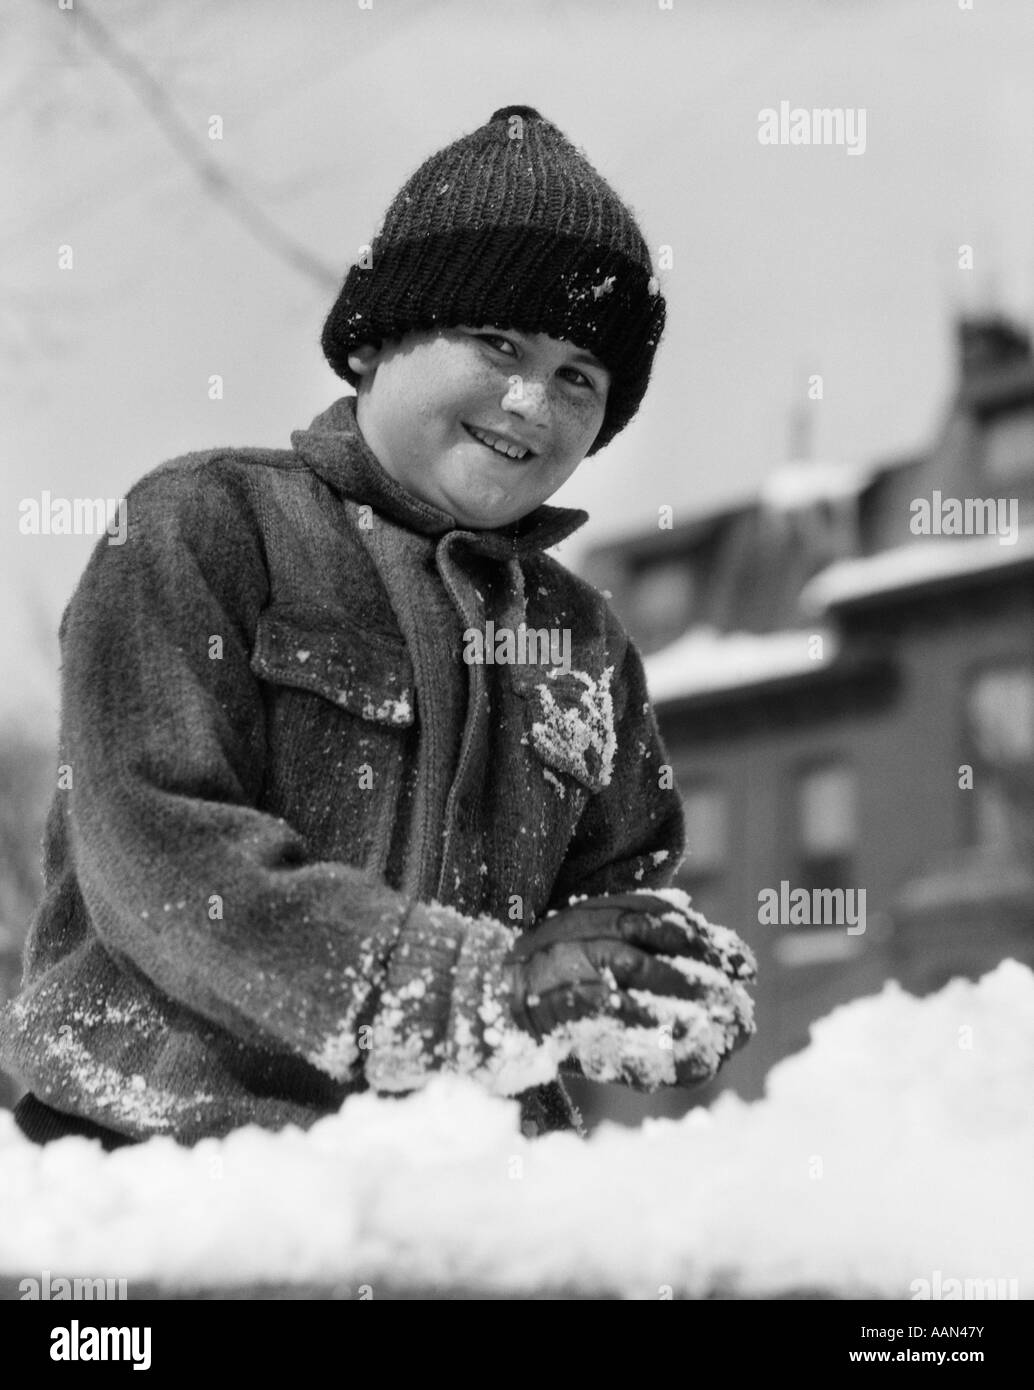 1920s 1930s SMILING BOY PLAYING IN SNOW MAKING SNOWBALL LOOKING AT CAMERA Stock Photo